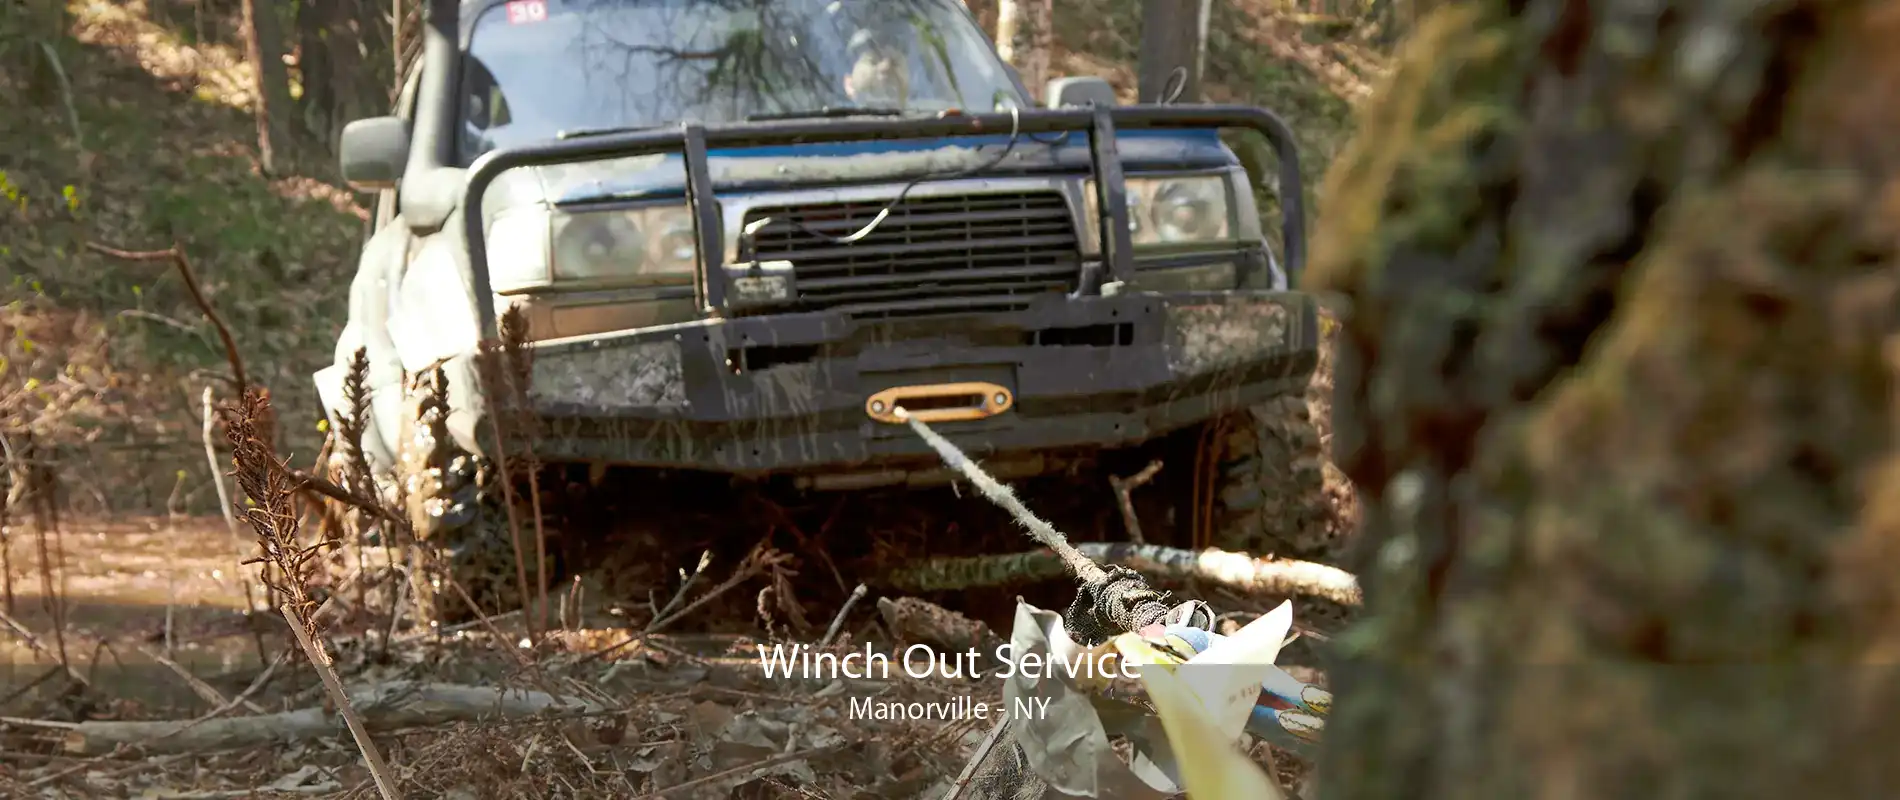 Winch Out Service Manorville - NY